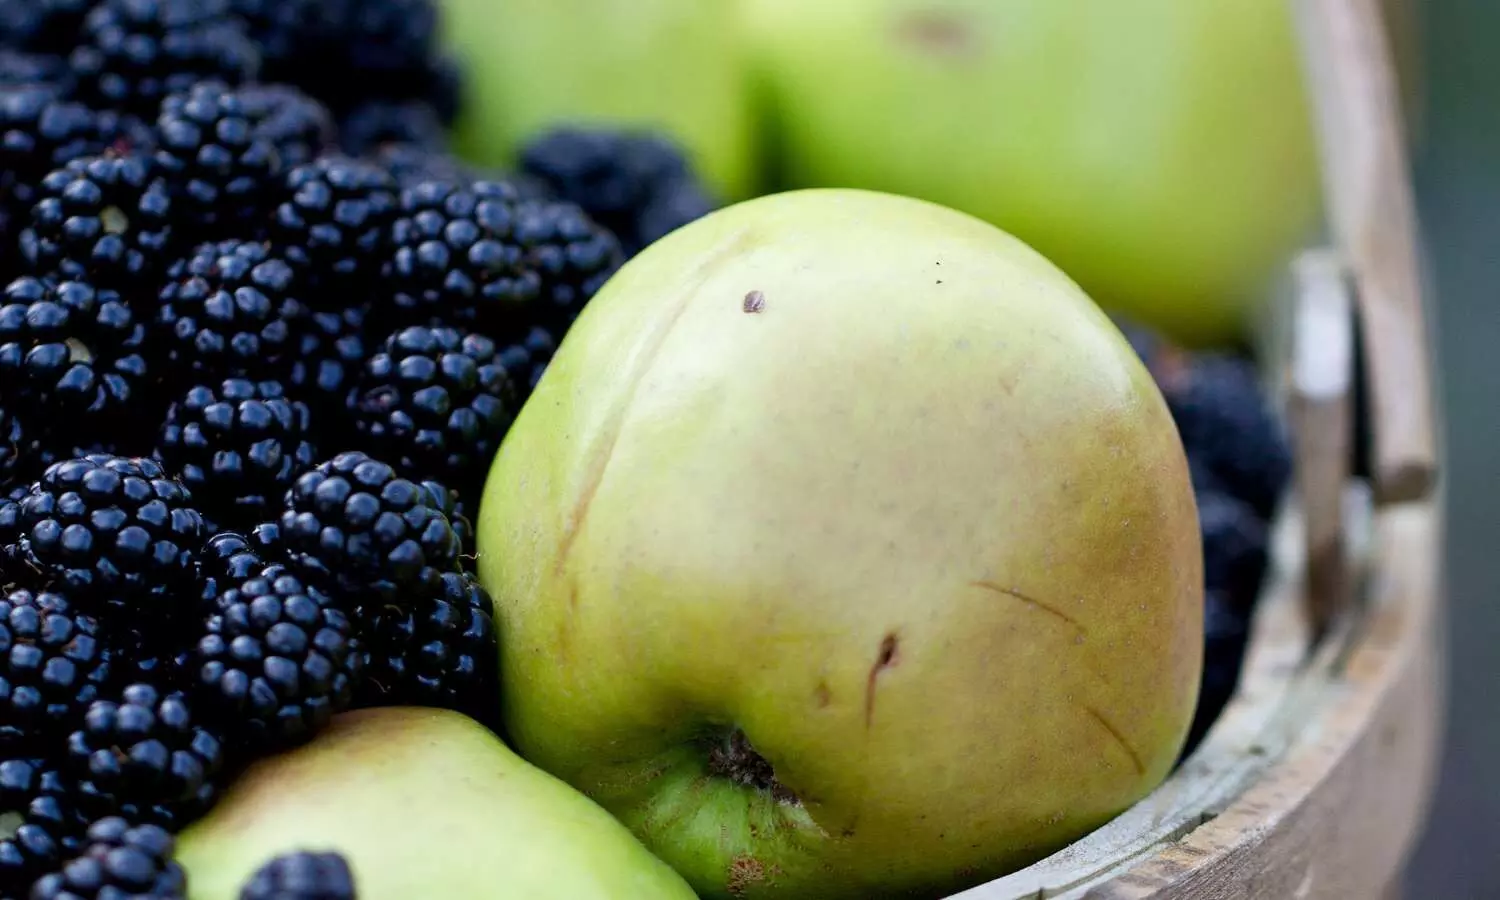 Eating flavonol-rich foods like blackberries and apples can prevent frailty